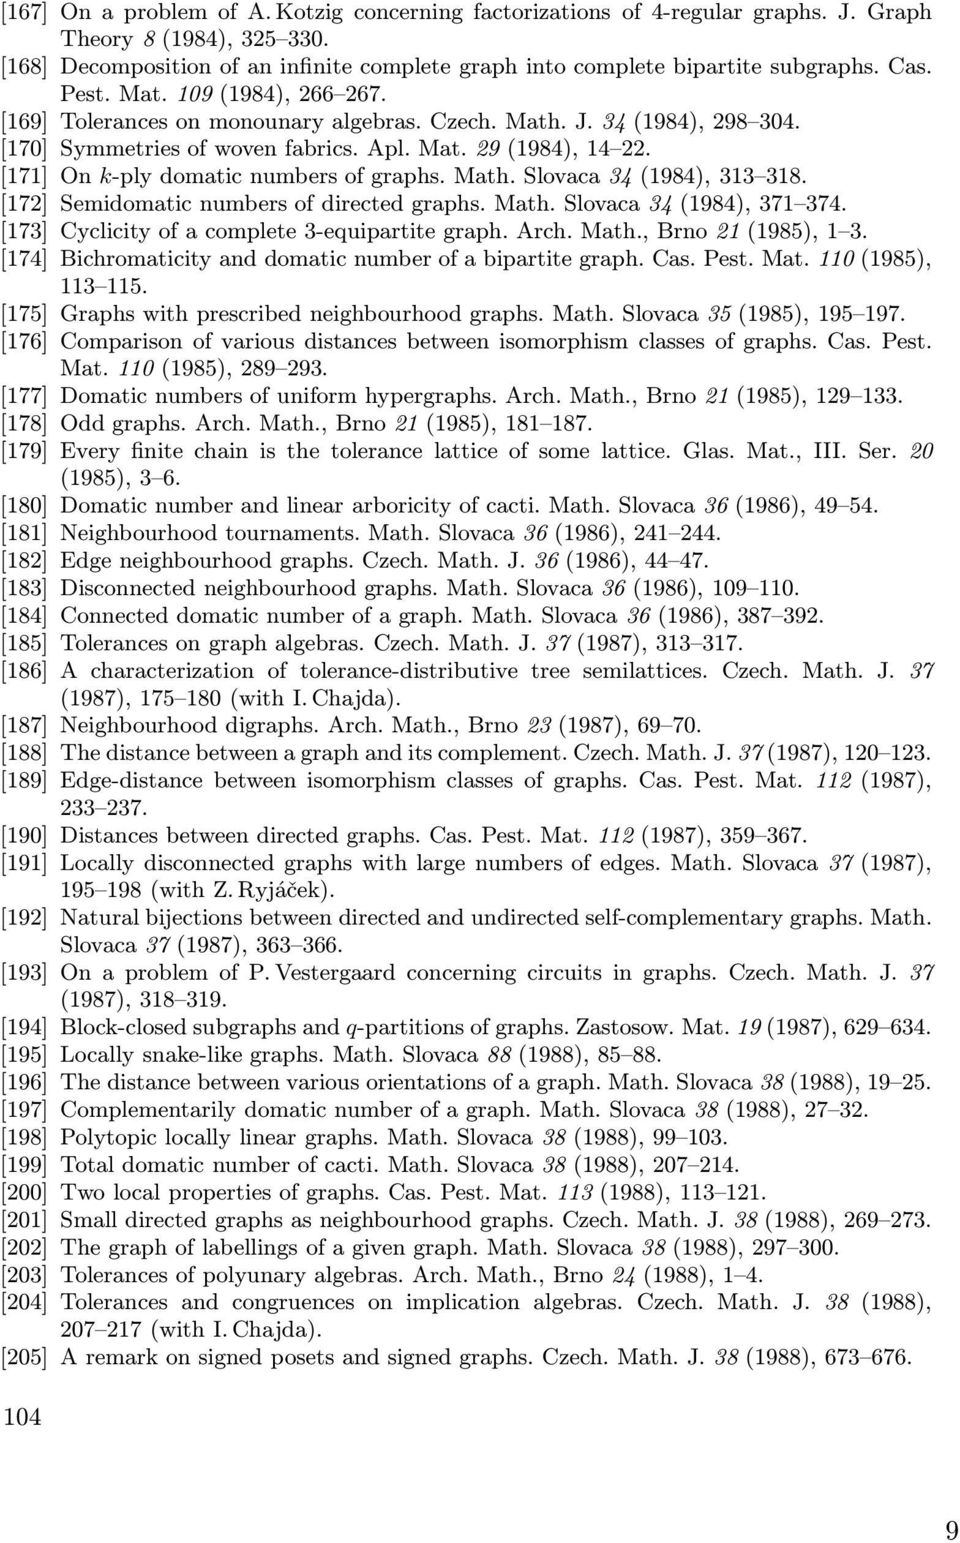 [171] On k-ply domatic numbers of graphs. Math. Slovaca 34 (1984), 313 318. [172] Semidomatic numbers of directed graphs. Math. Slovaca 34 (1984), 371 374.